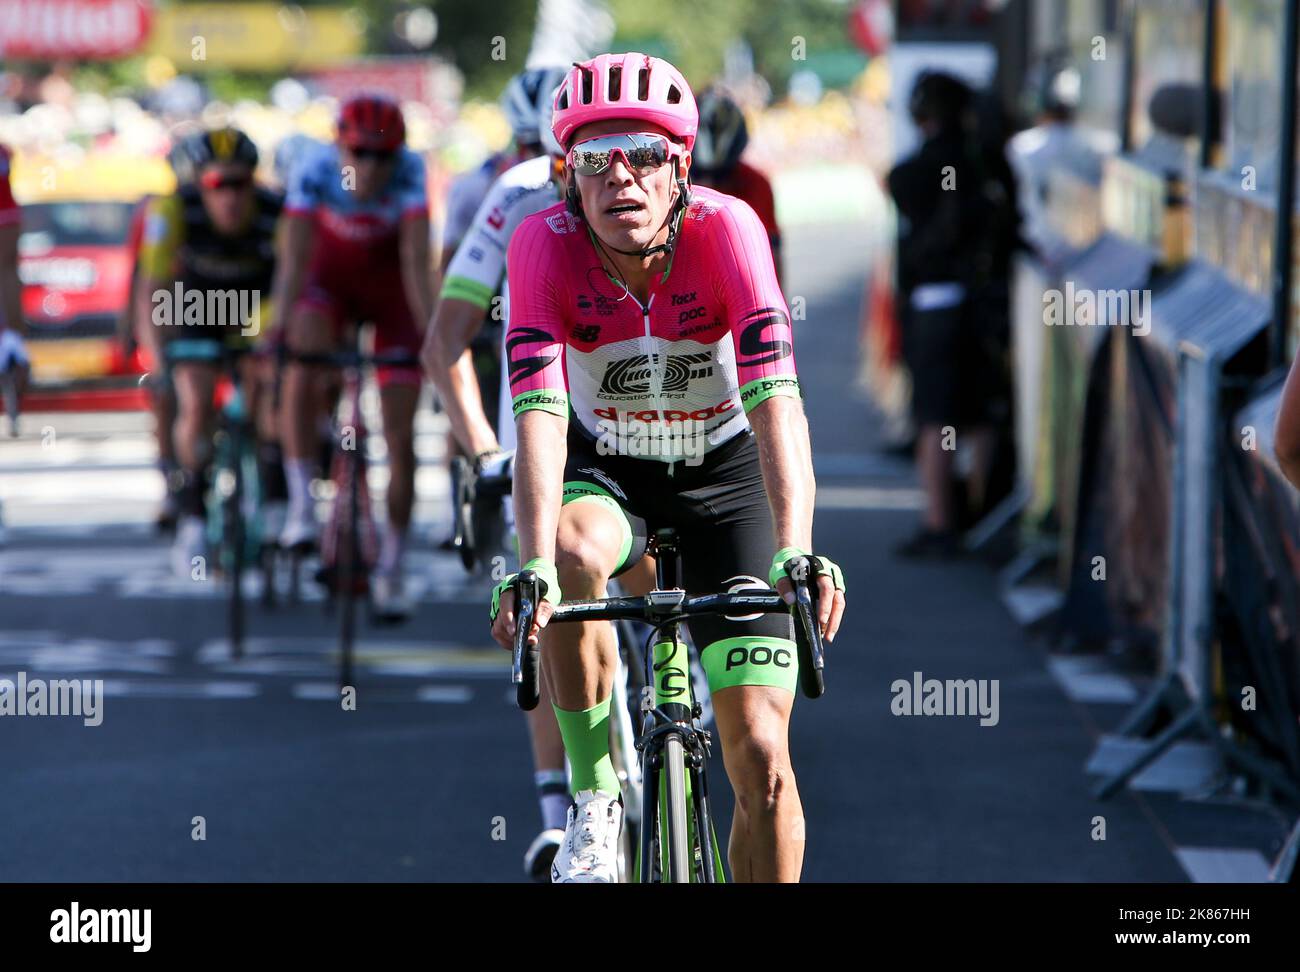 Rigoberto Uran (EF Education First Drapac) during stage 6 of the Tour de France from Brest to Mur-de-Bretagne Guerledan Stock Photo